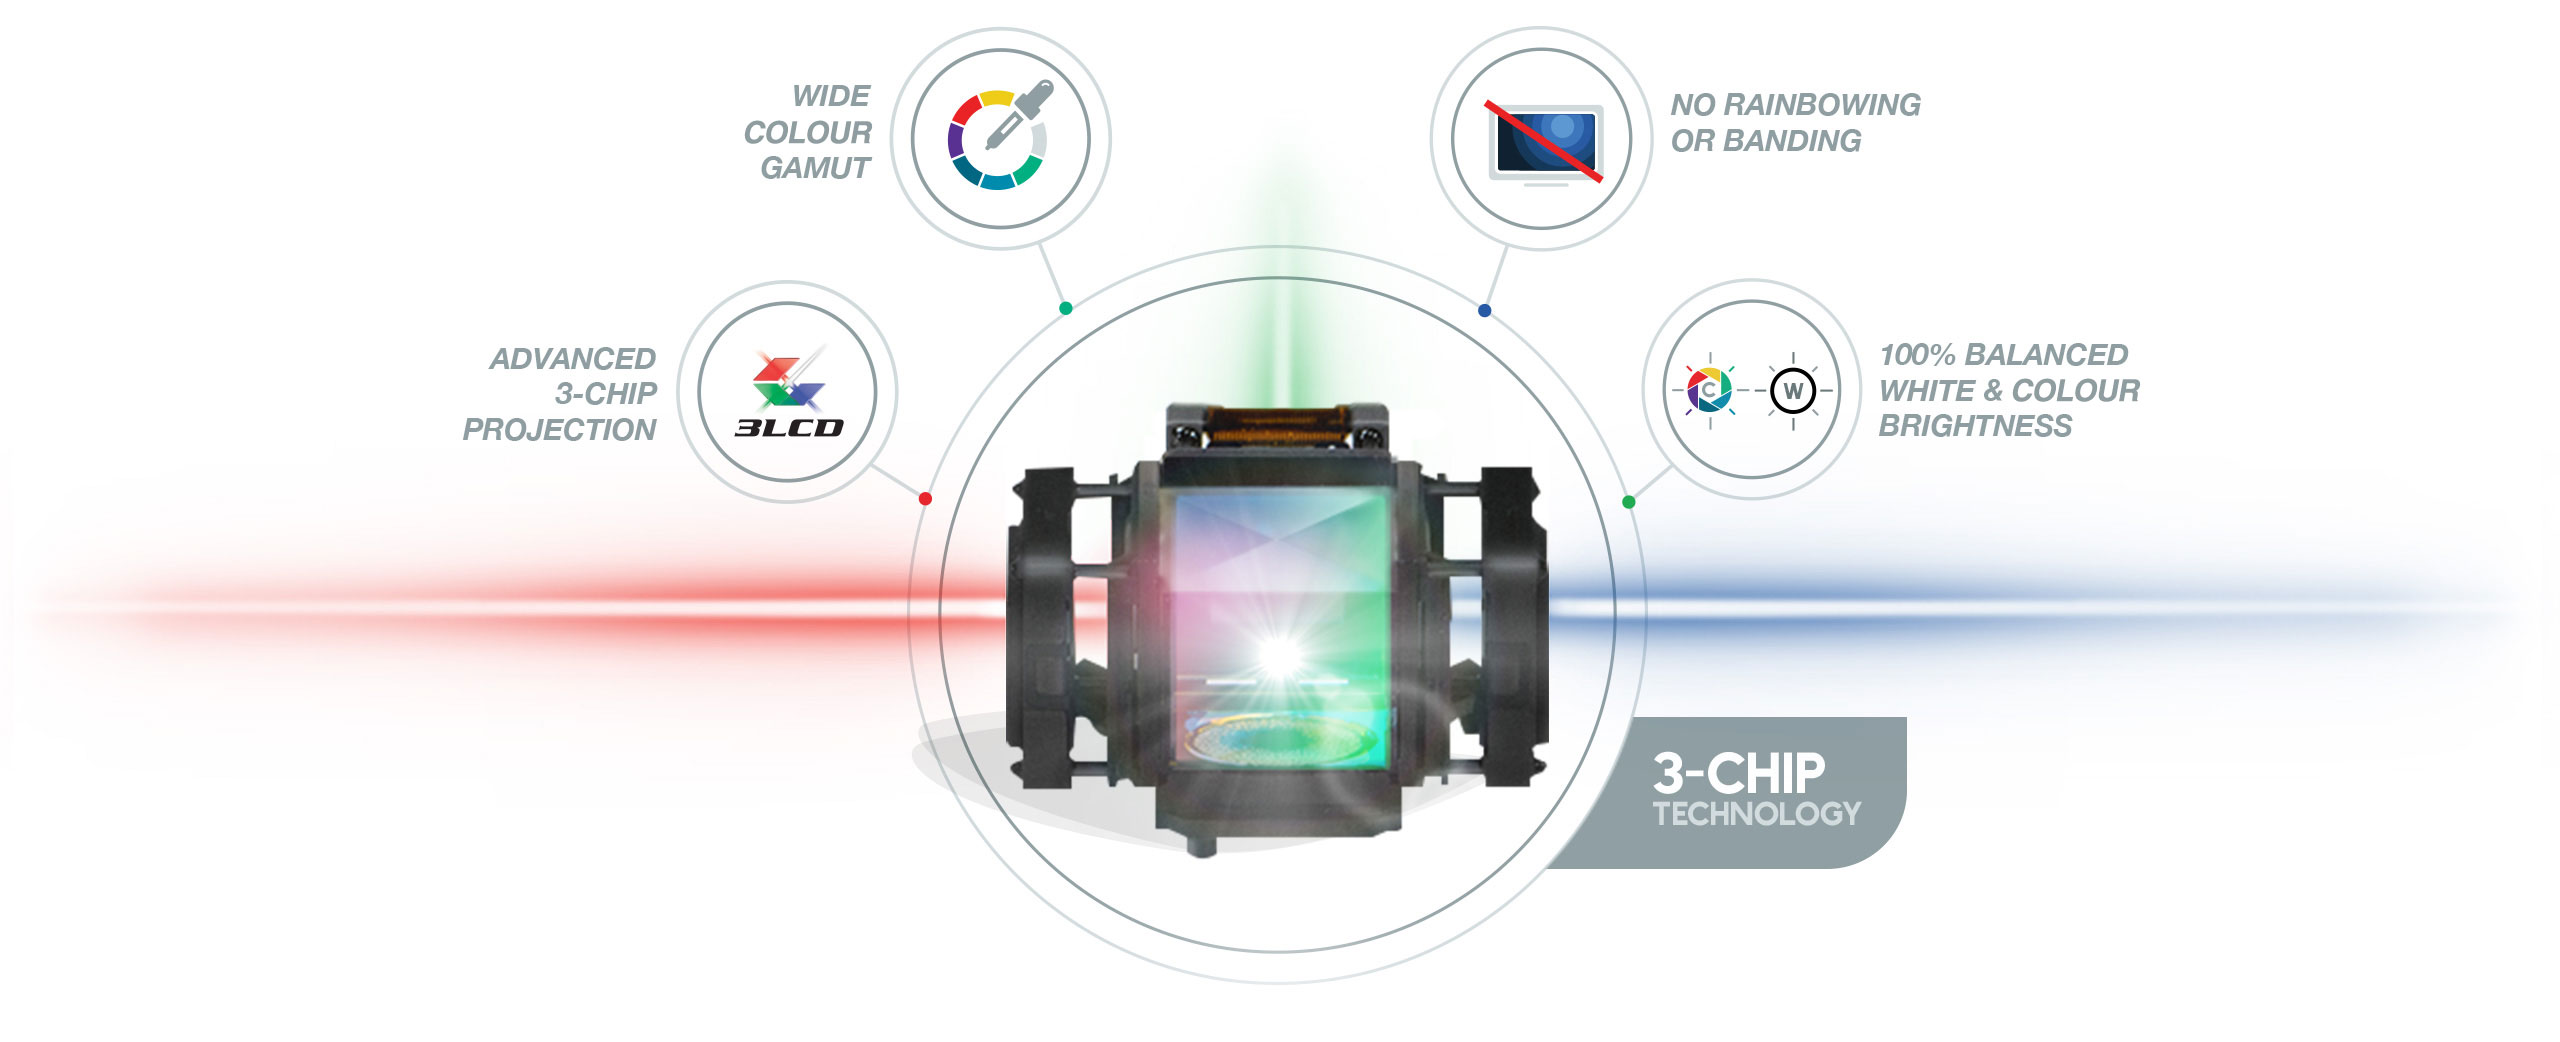 Epson 3-Chip Projection Technology